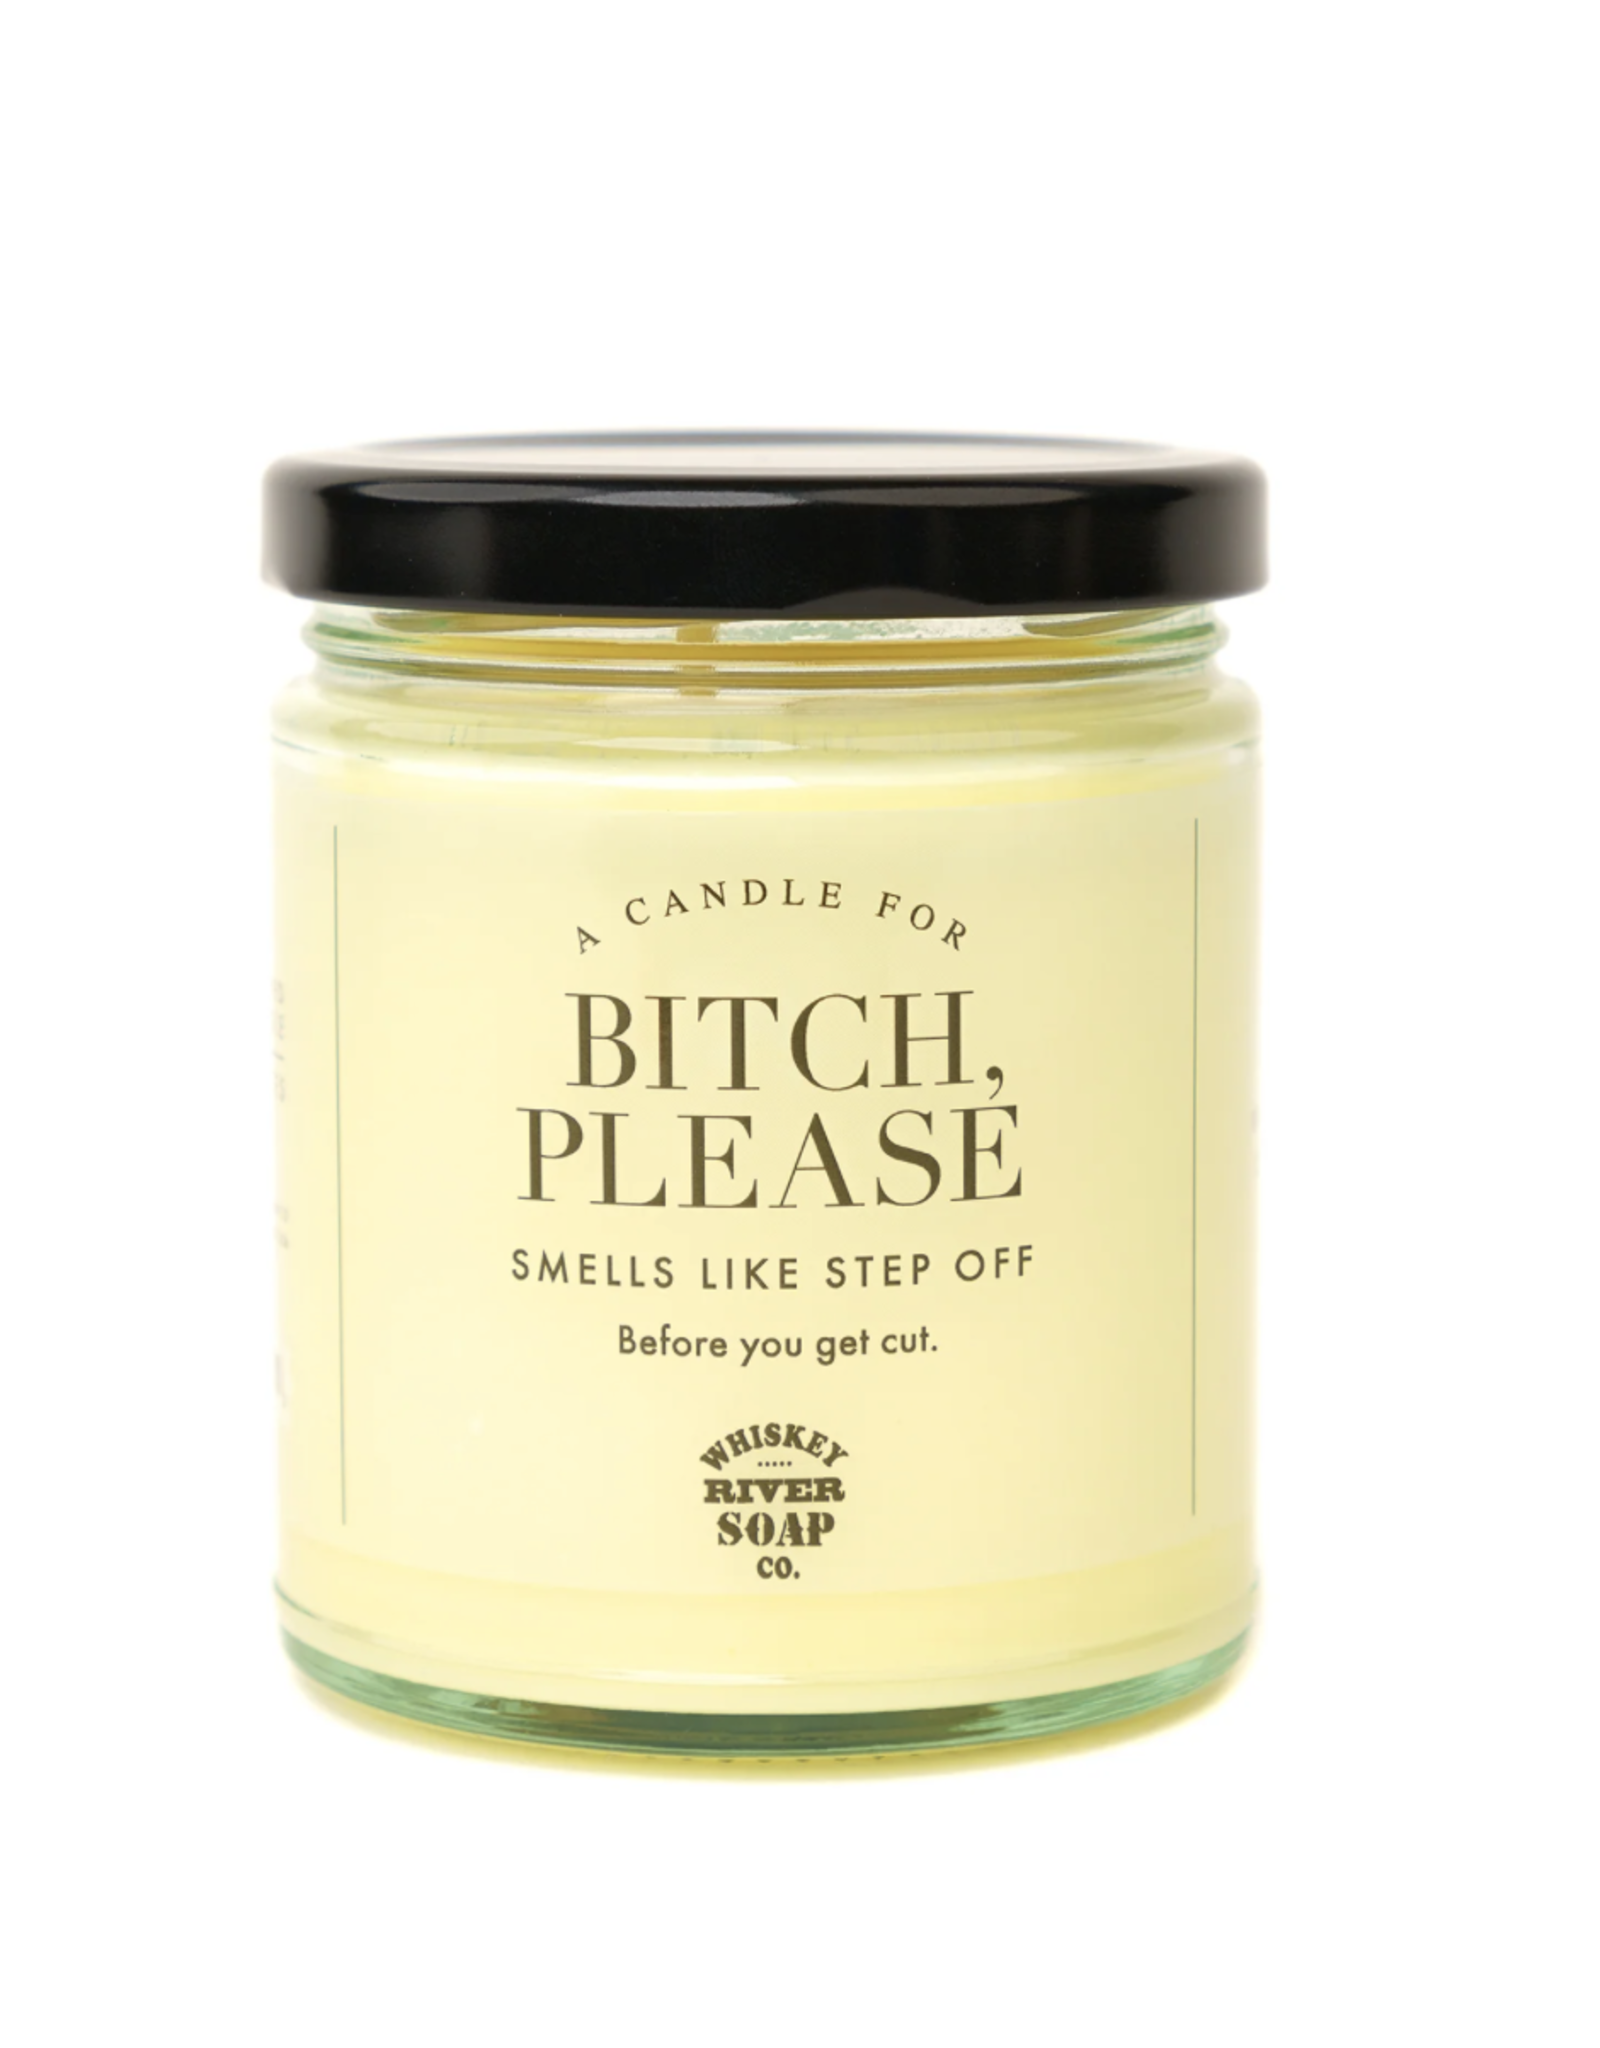 Whiskey River Soap Co. Bitch, Please Candle